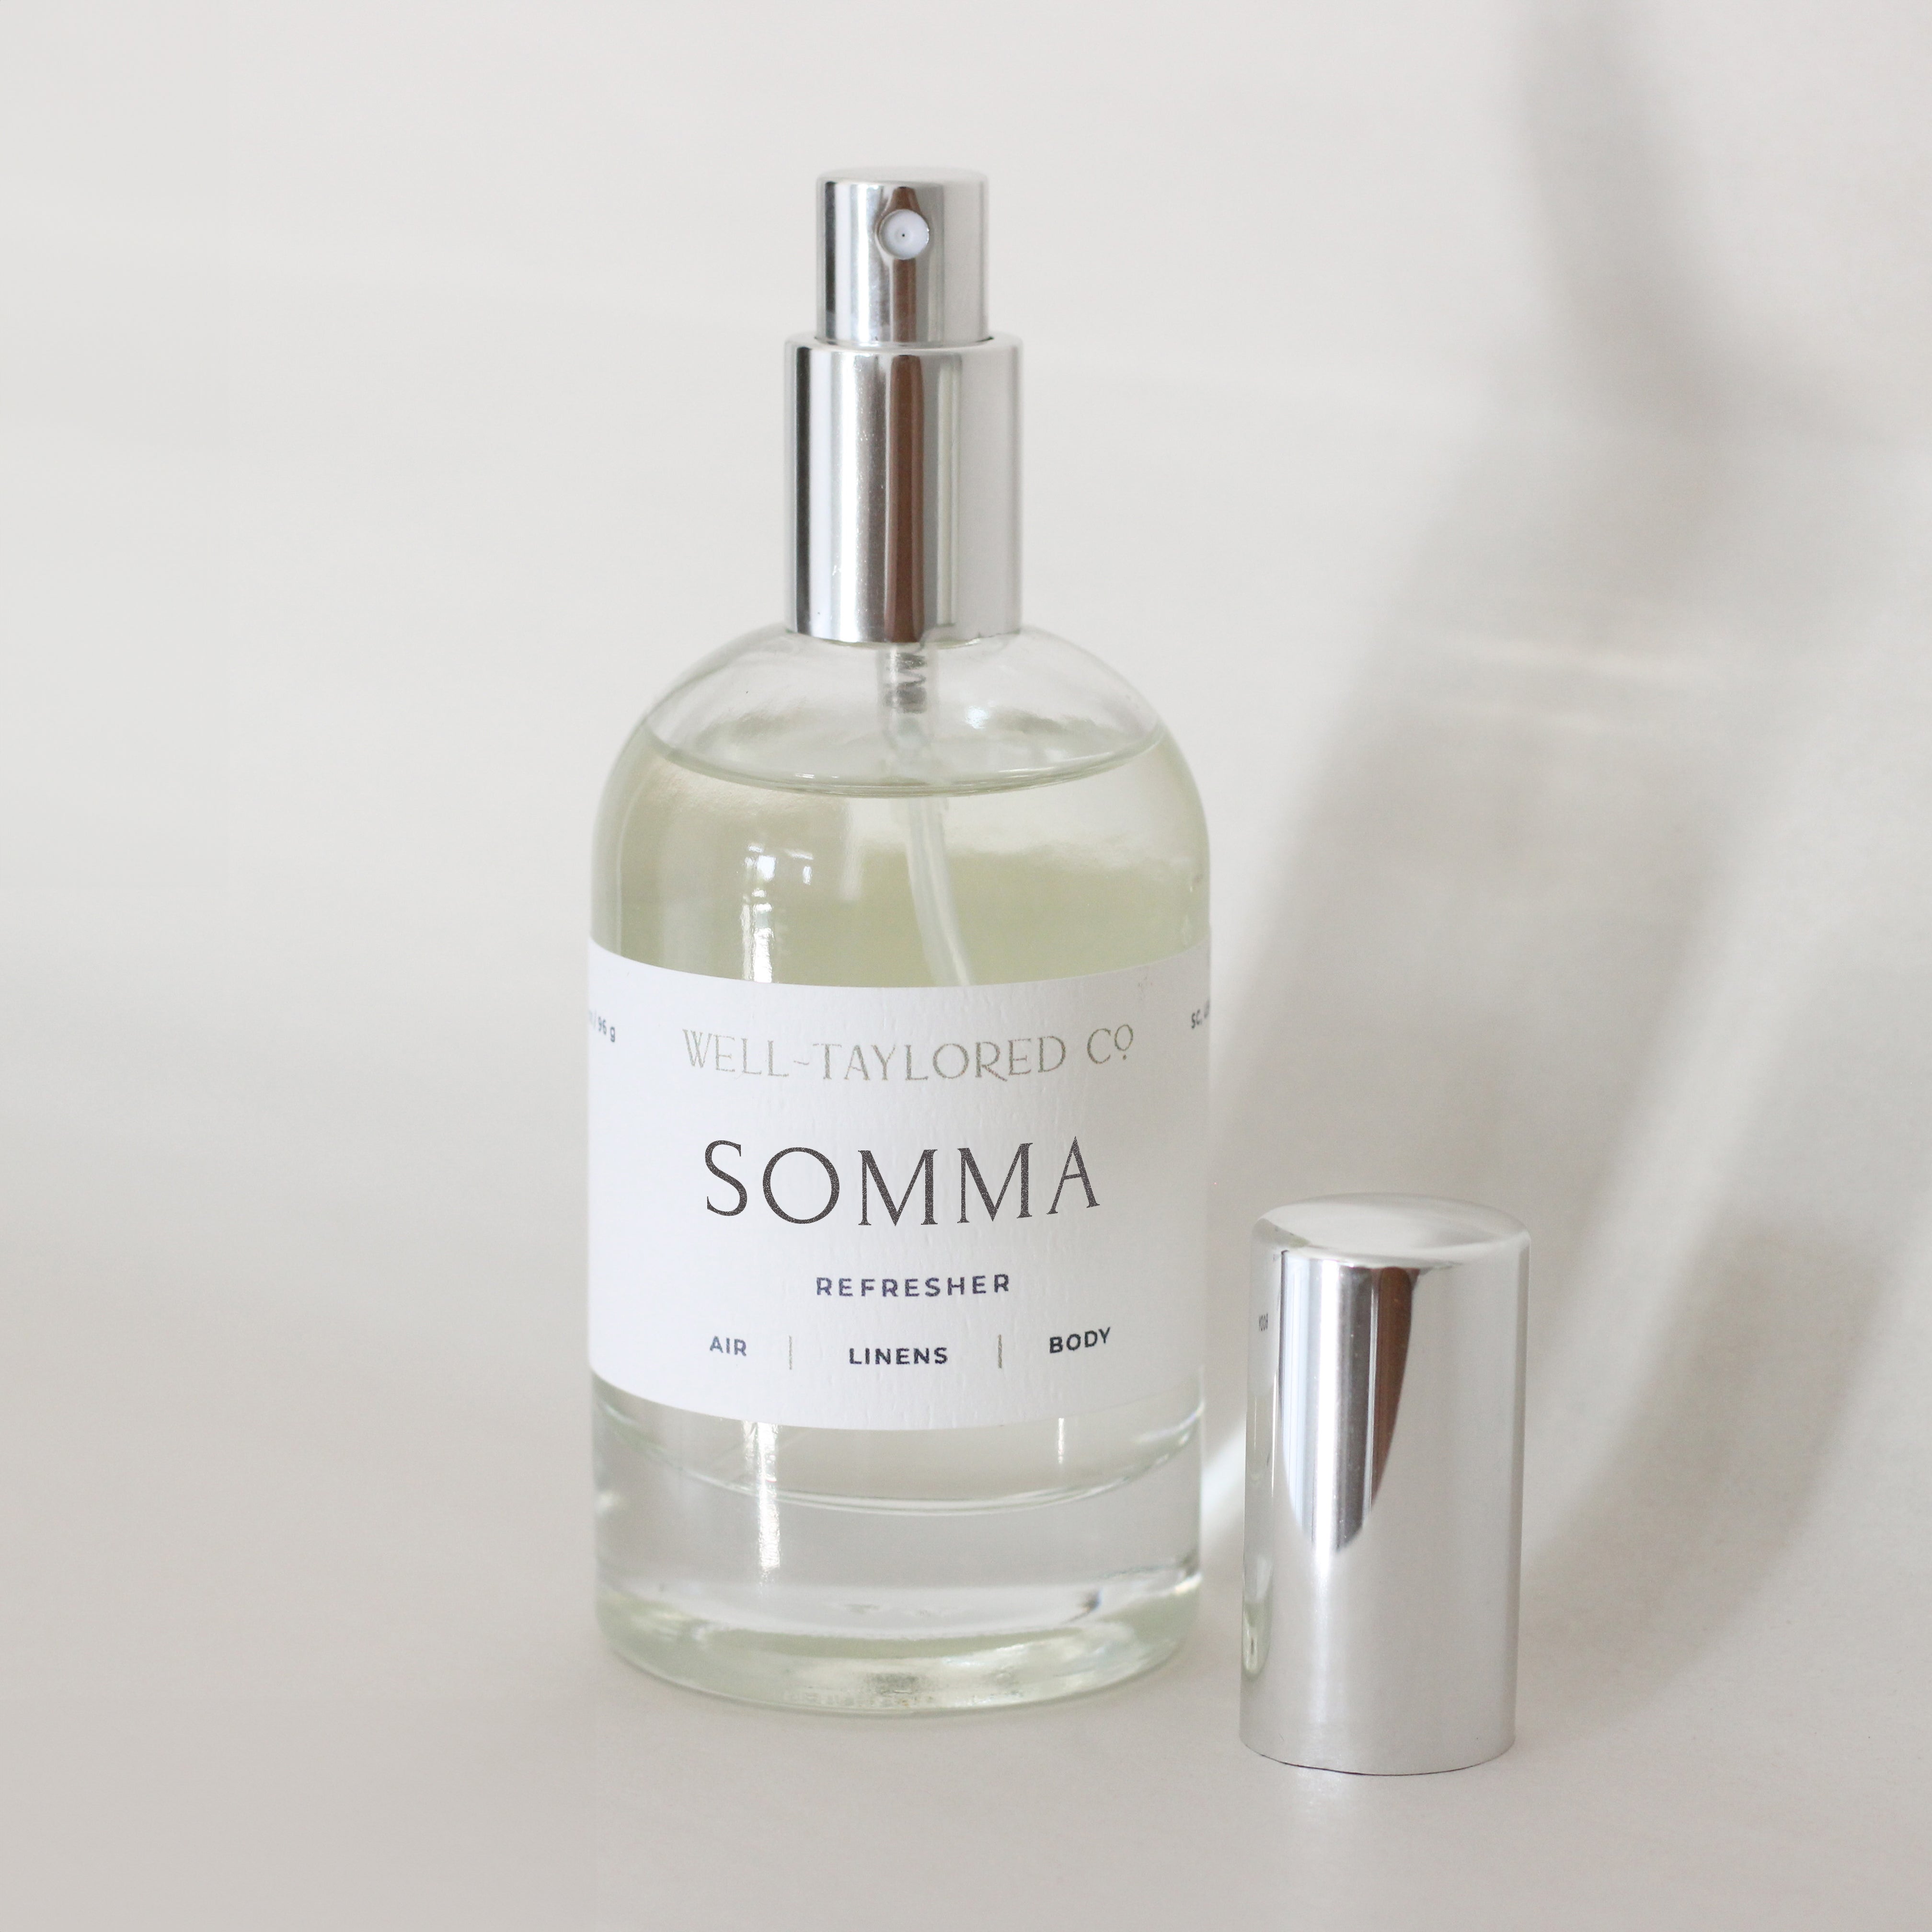 Somma Air & Linen Refresher | Well-Taylored Co.